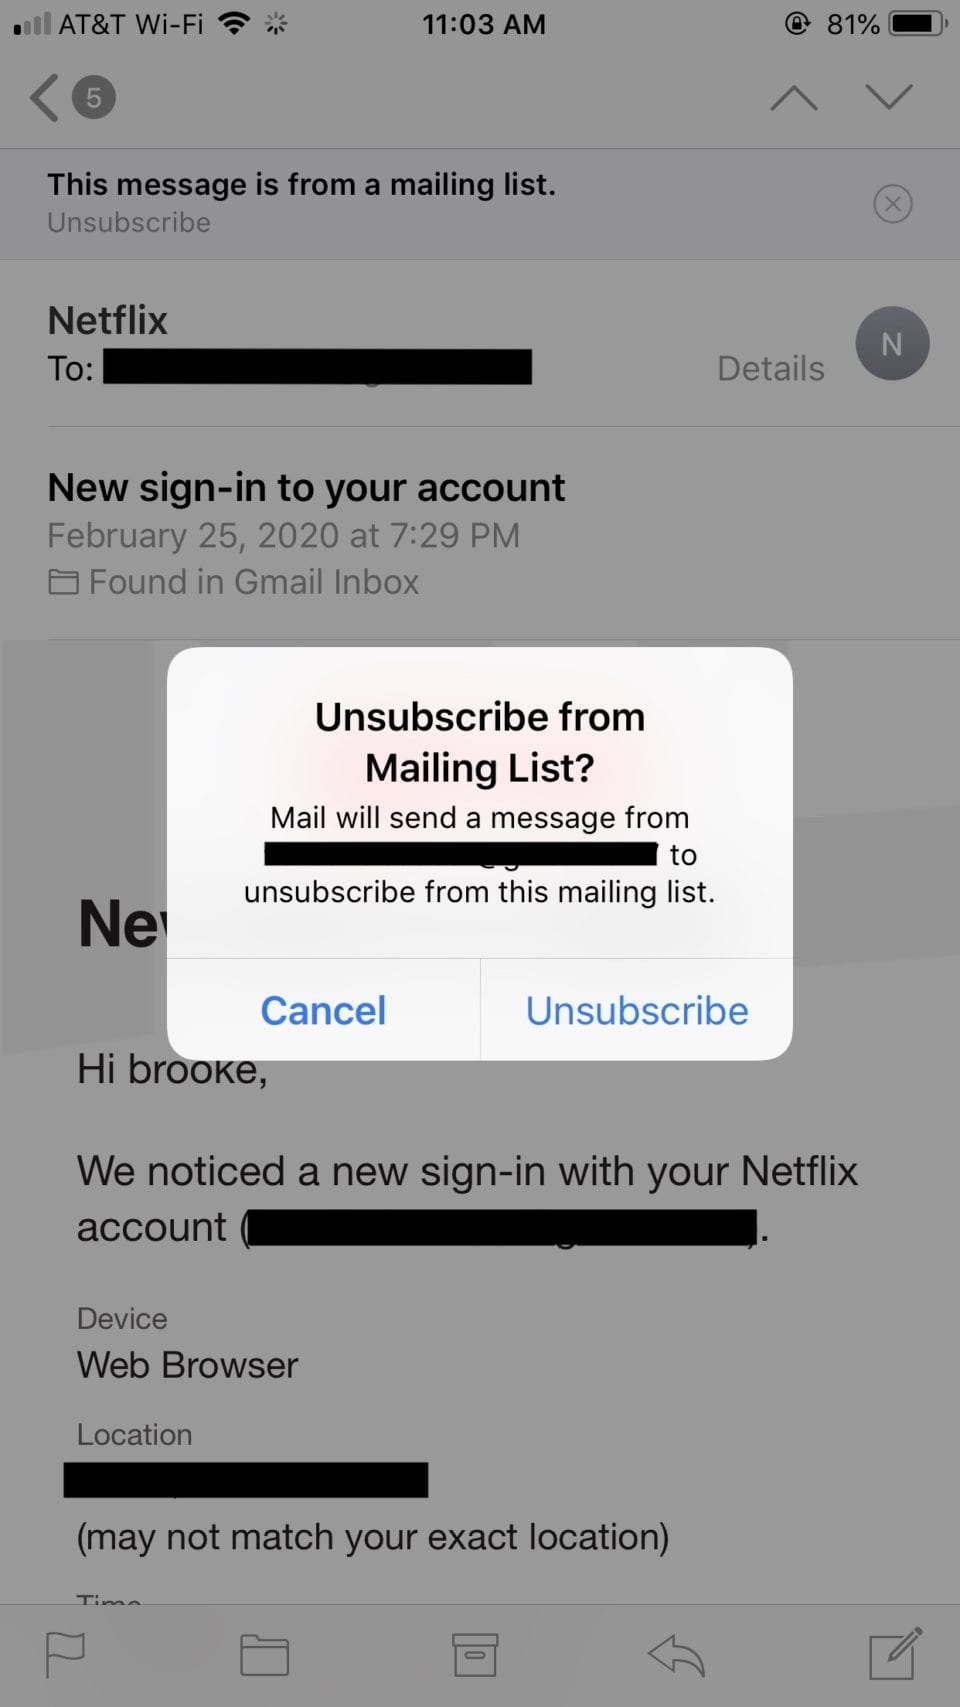 List unsubscribe in iOS Mail, unsubscribe confirmation